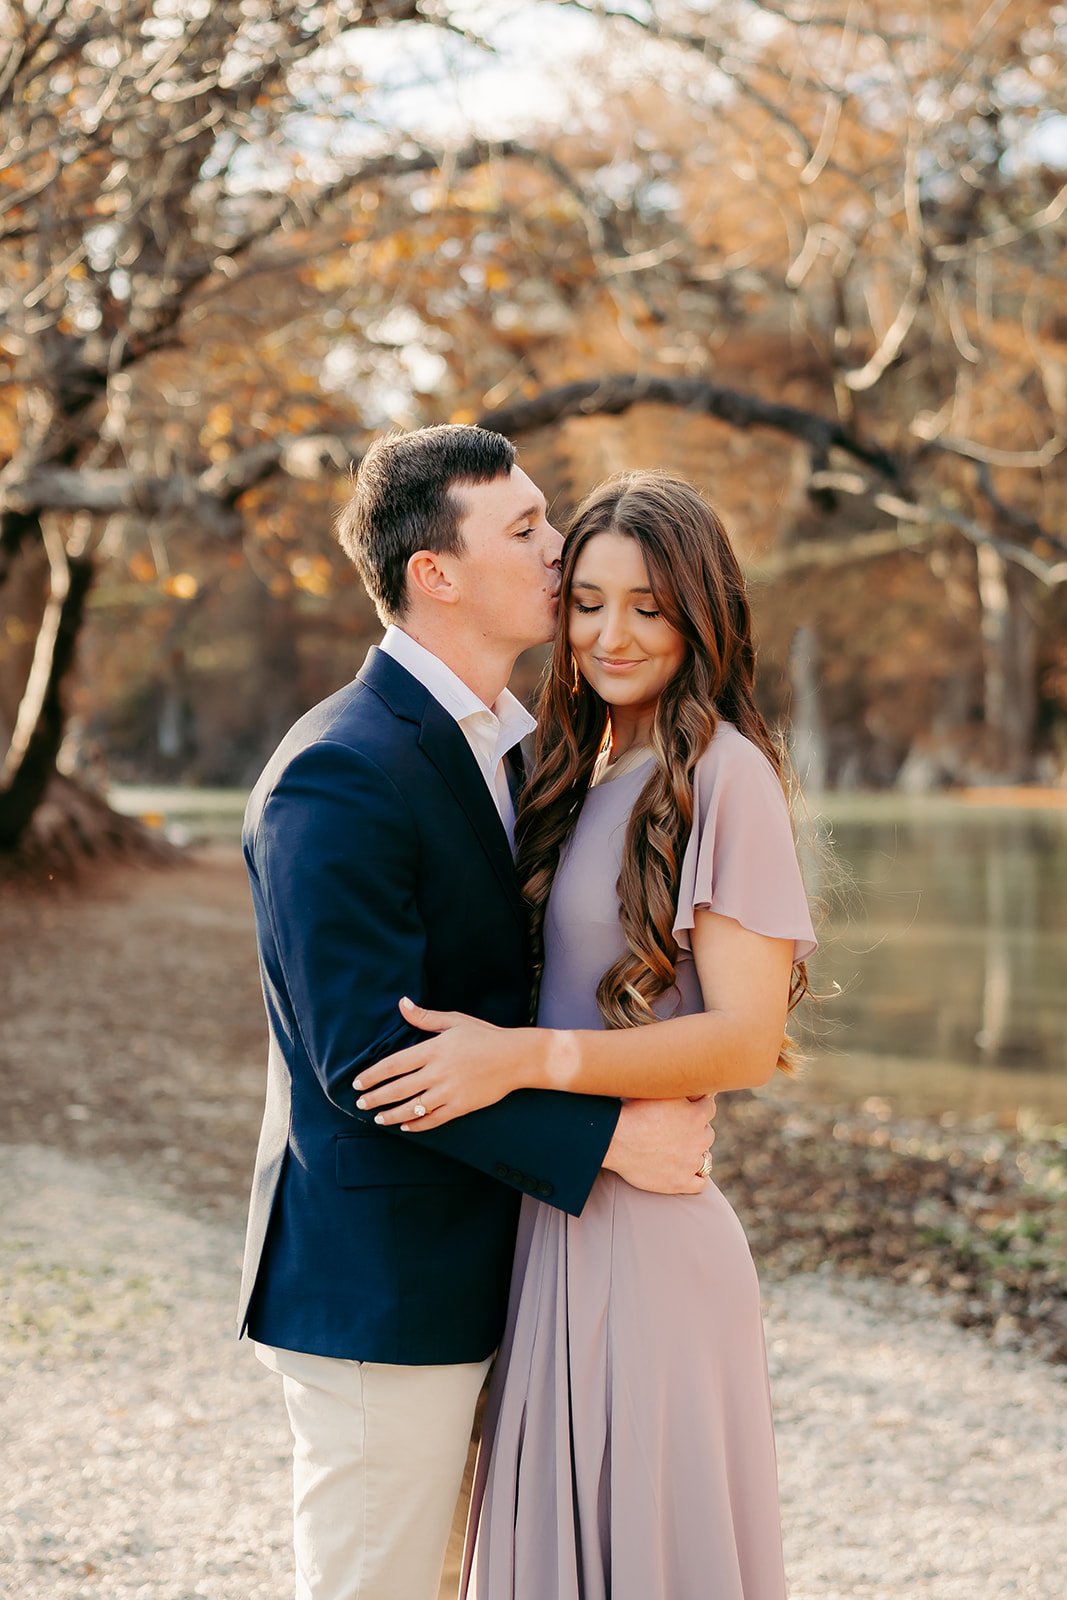 3 Tips to Help You Plan Your Unique Engagement Session